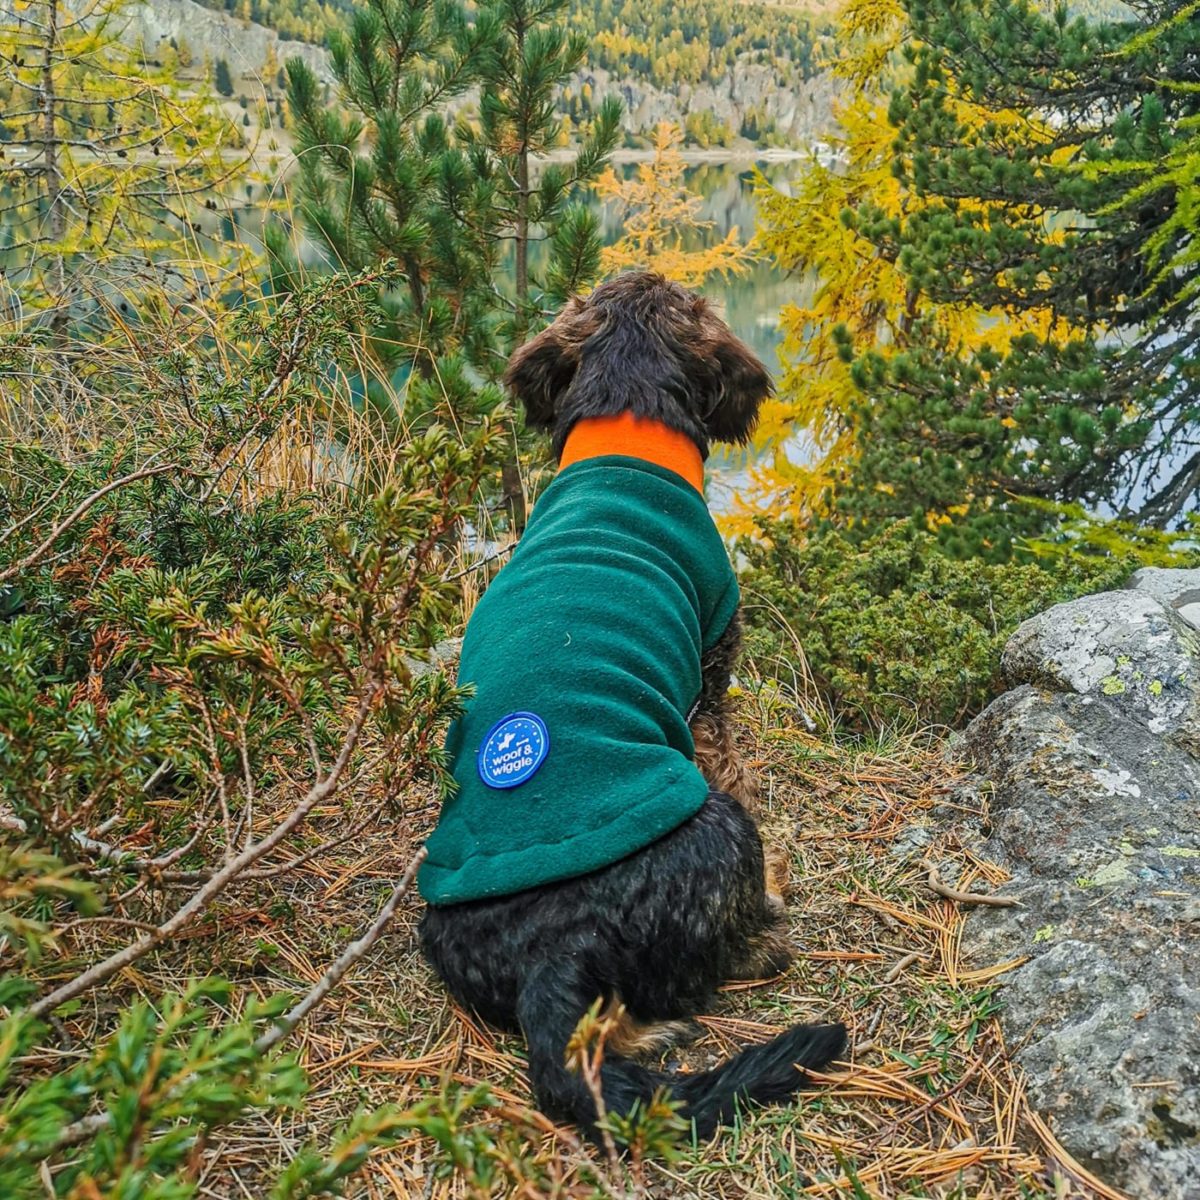 Wire-haired dachshund Fritz in a Polartec sweater @dackeline.coco